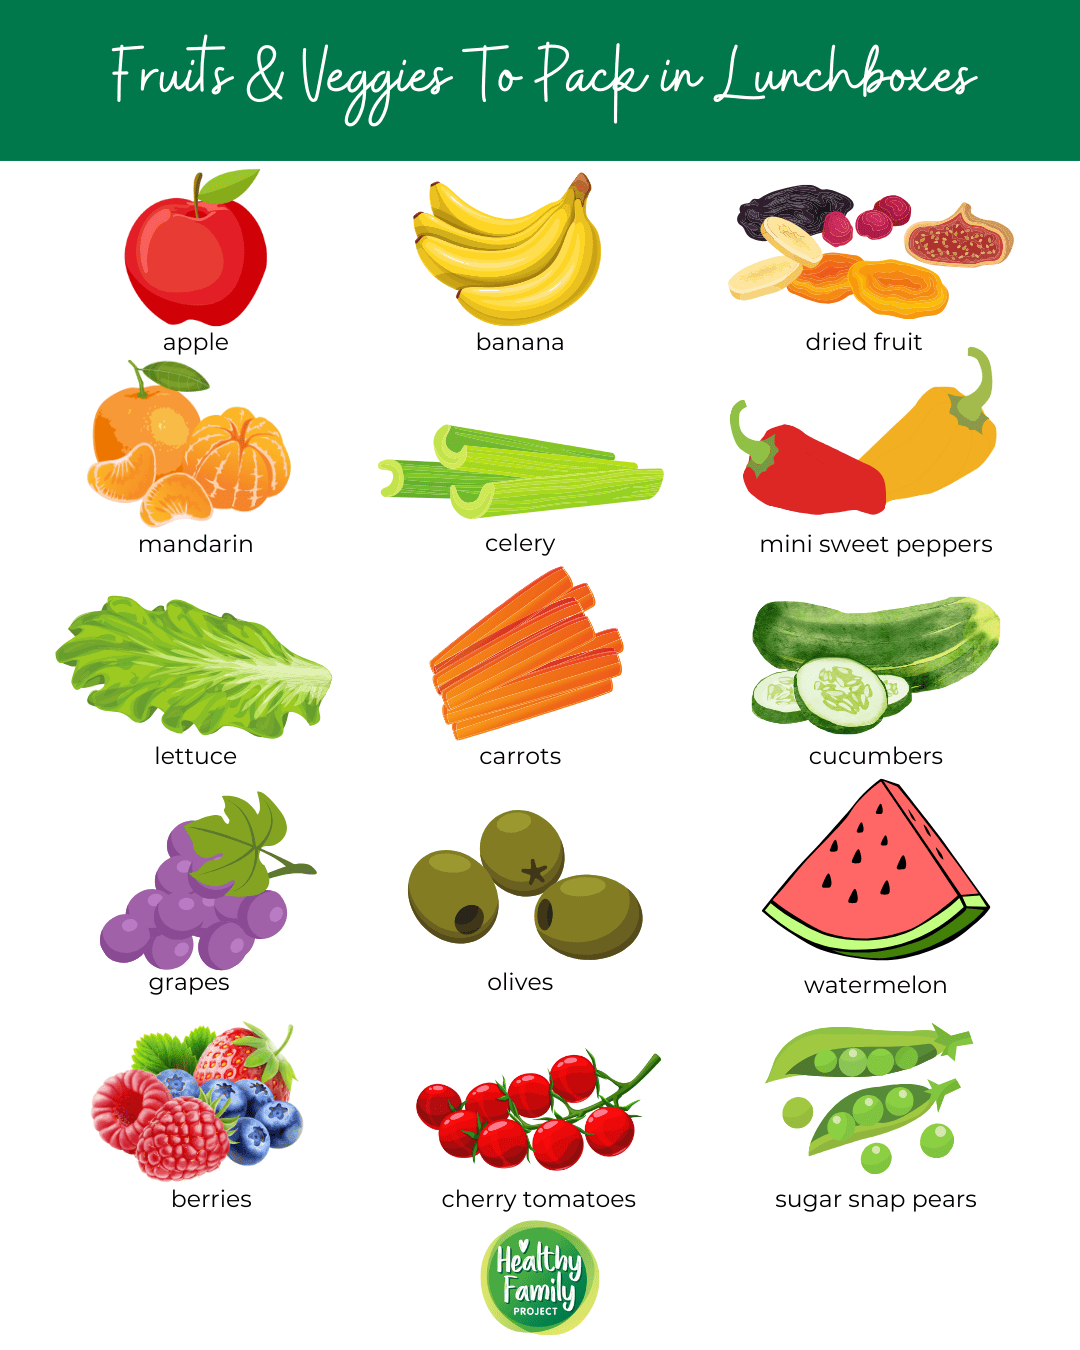 Fruits & Veggies To Pack in Lunchboxes Infographic